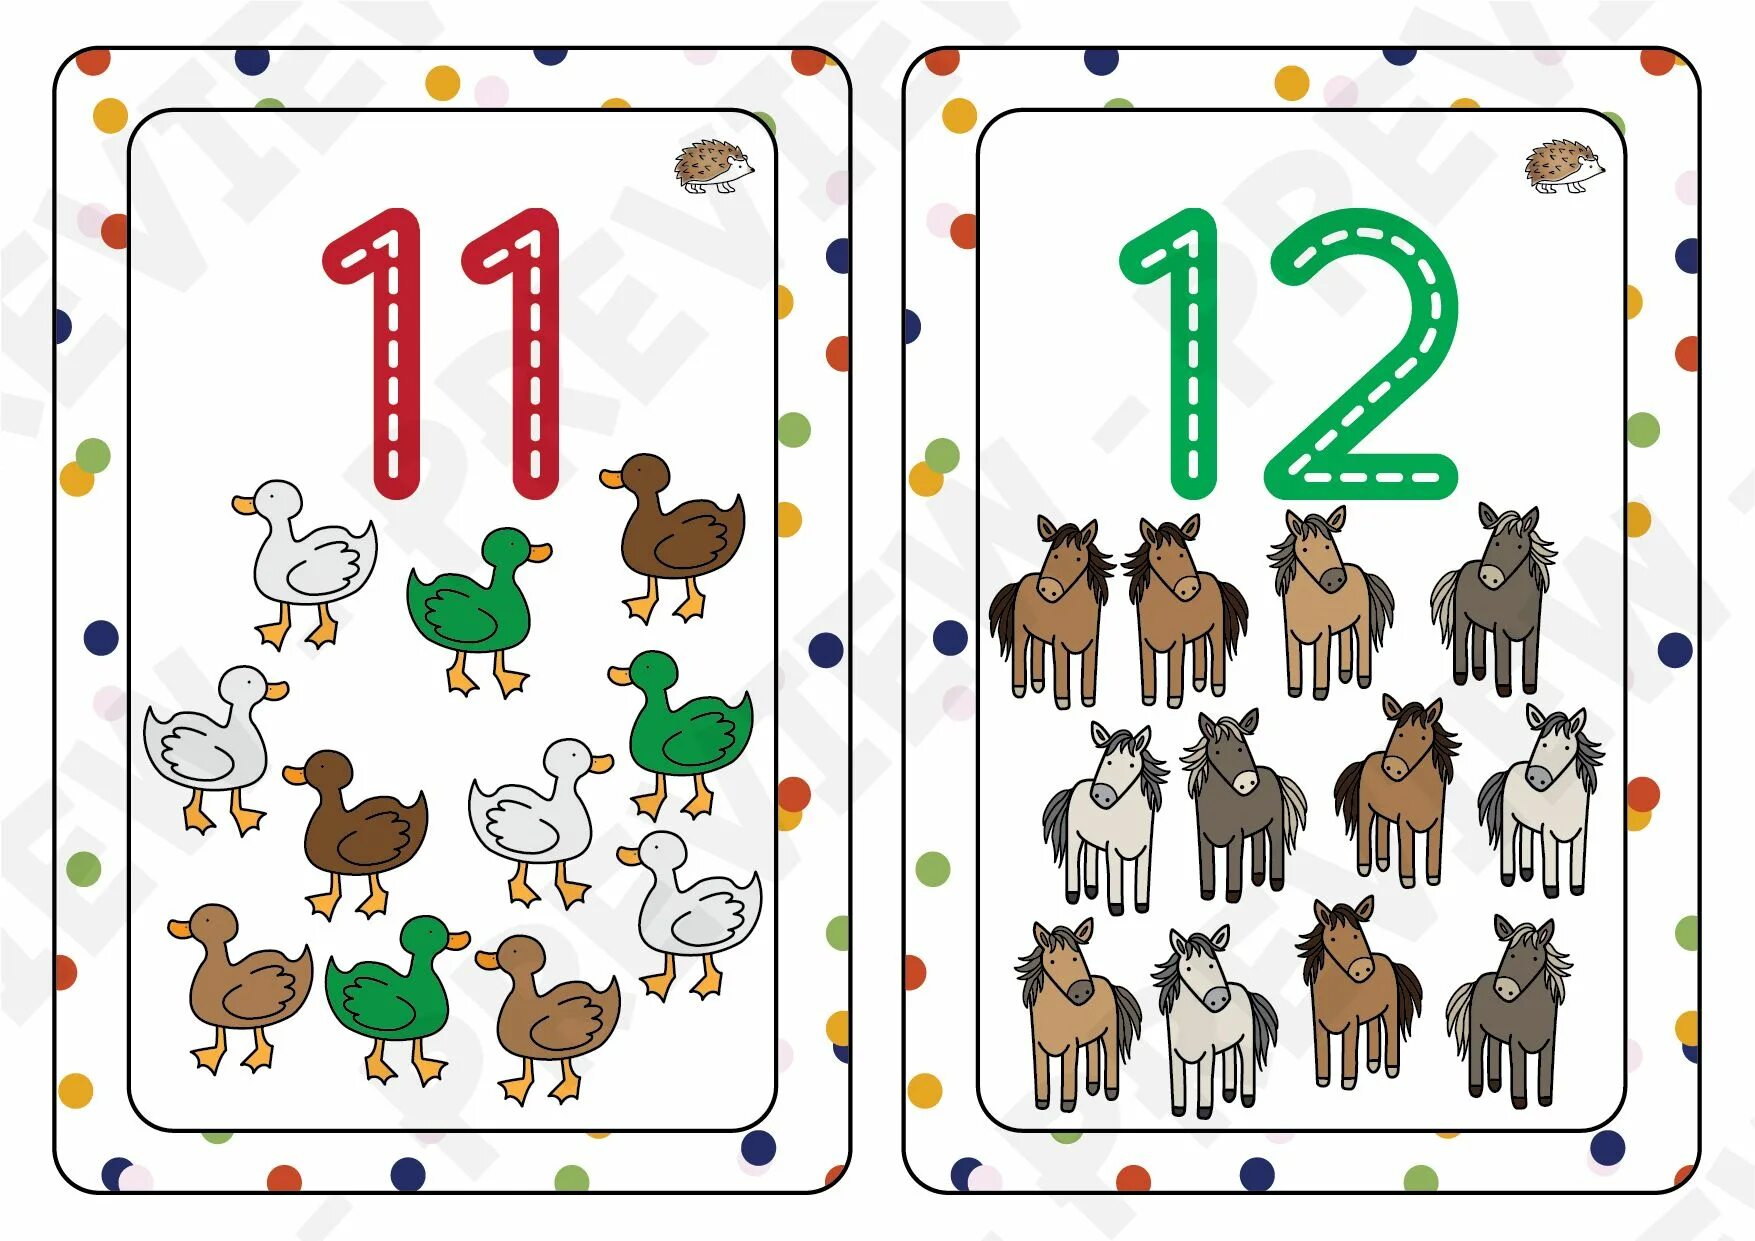 Cards with numbers. 1-20 Flashcards. Numbers Flashcards 1-20. Numbers 1-20 Cards.